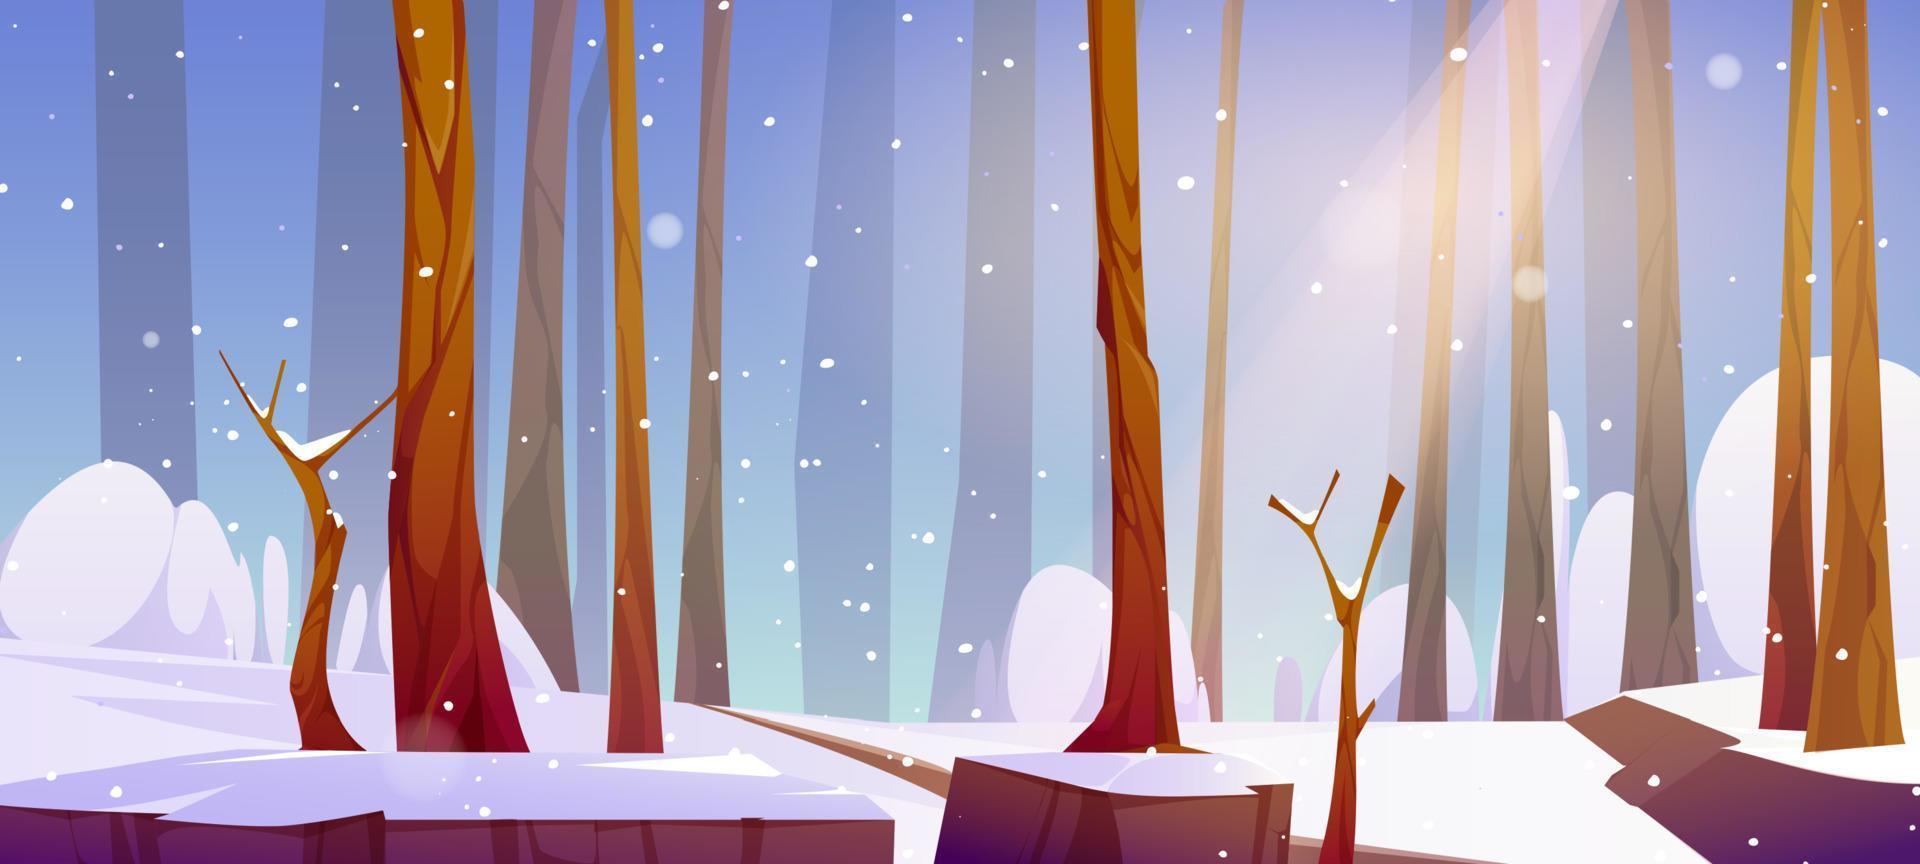 Winter landscape of forest with snow vector